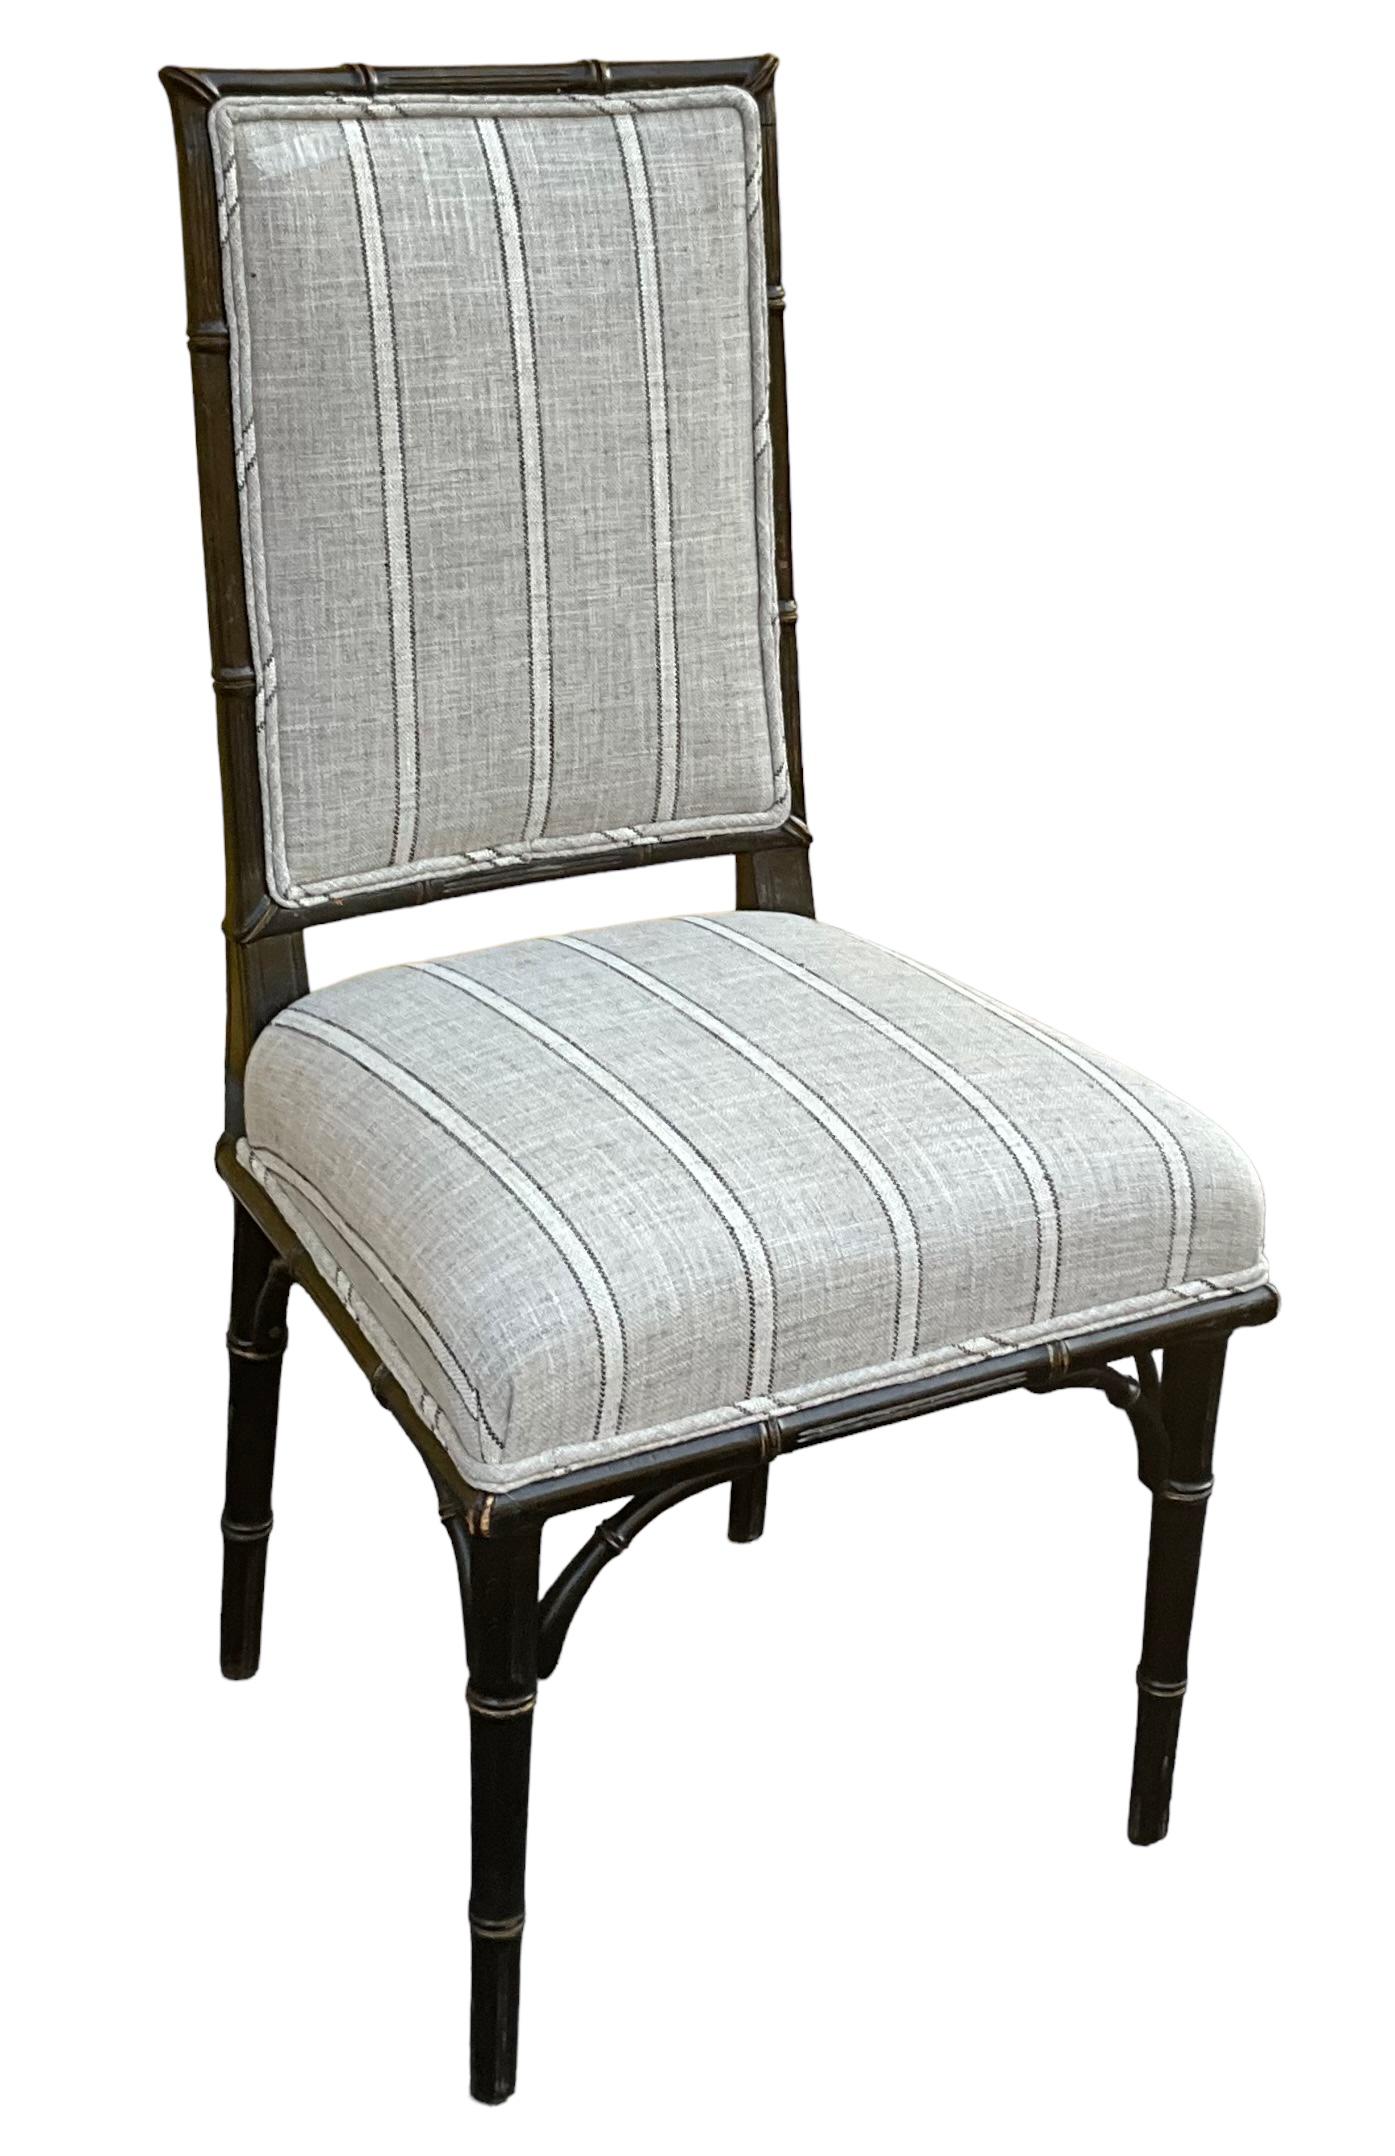 20th Century Early 20th-C. Regency Style Ebonized Faux Bamboo Side Chairs In Linen -Pair For Sale